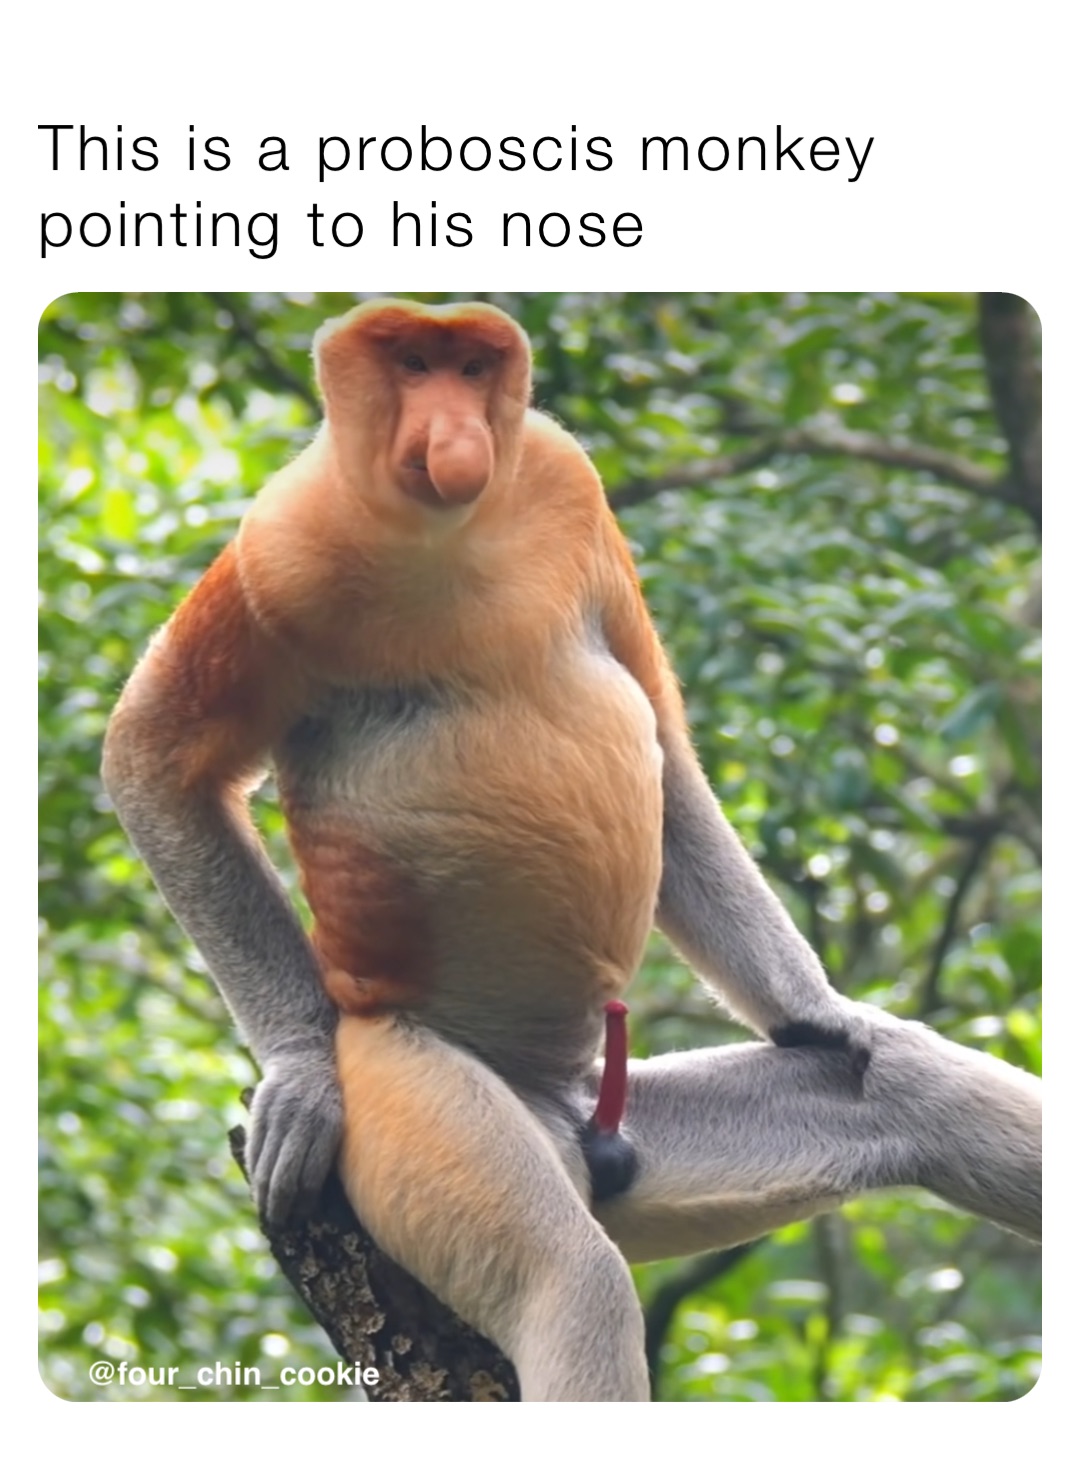 This is a proboscis monkey pointing to his nose